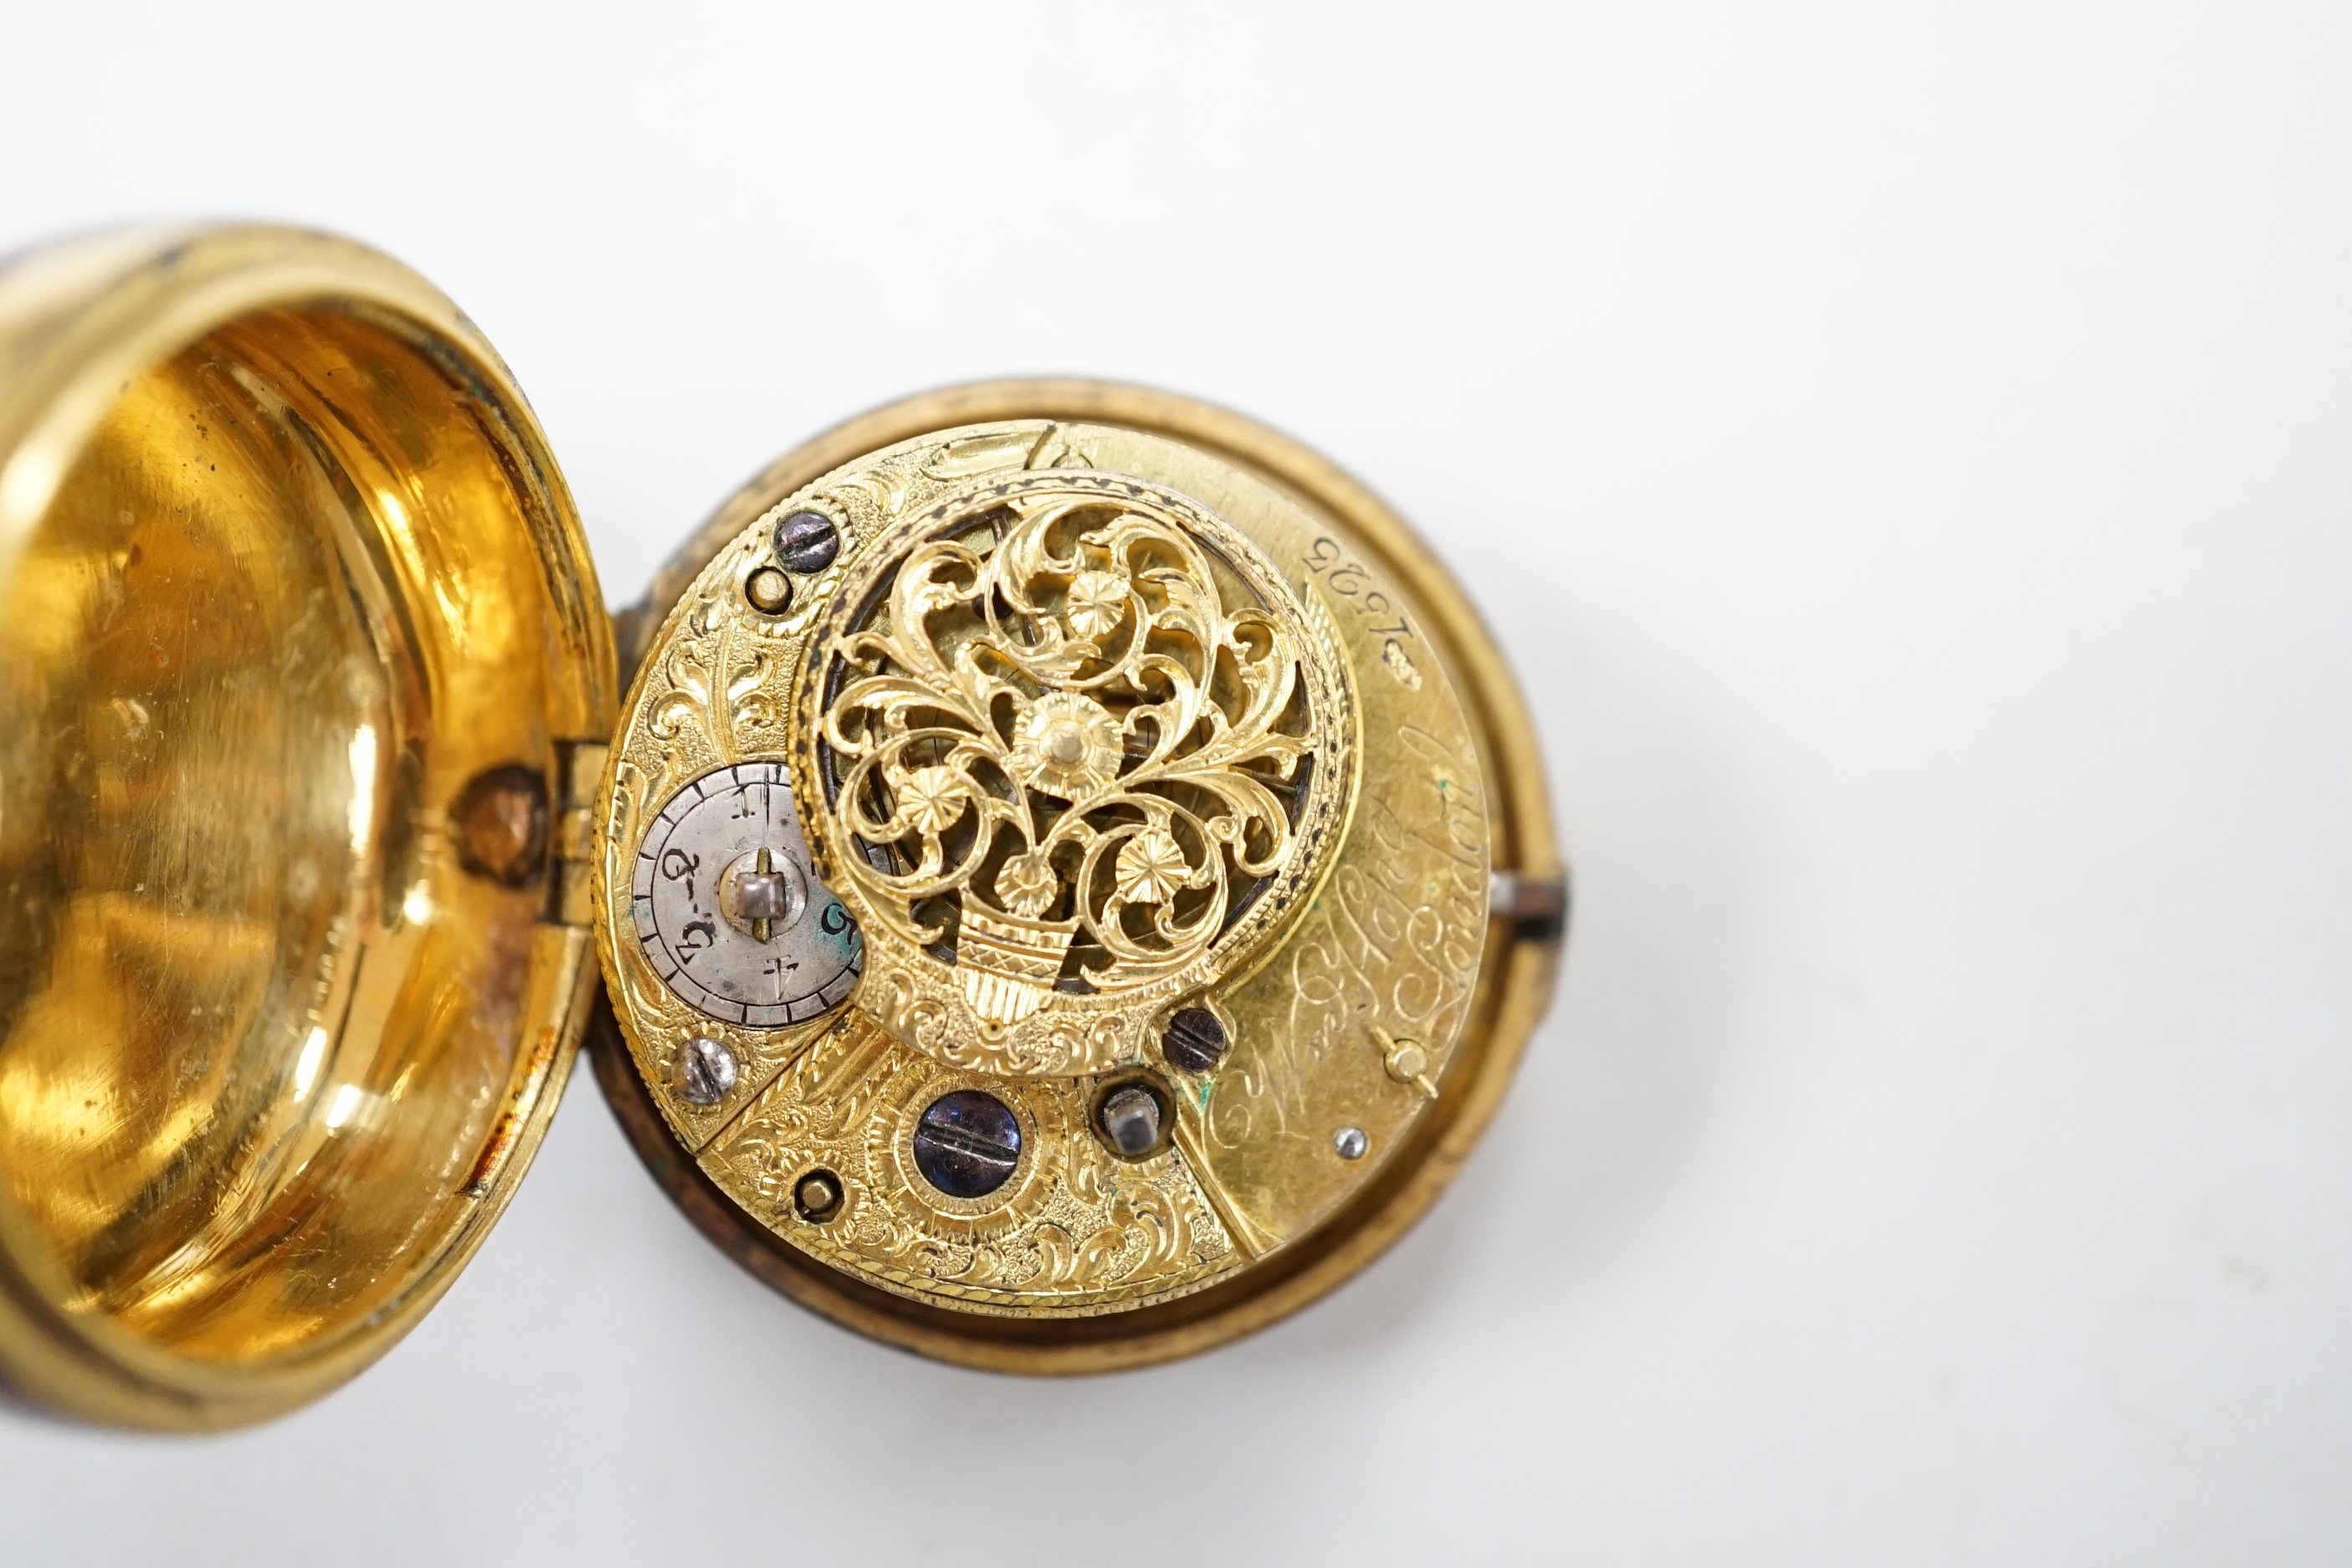 An 18th century gilt metal pair cased keywind verge pocket watch, by William Hope, London, with Roman dial, the signed movement numbered 1523.